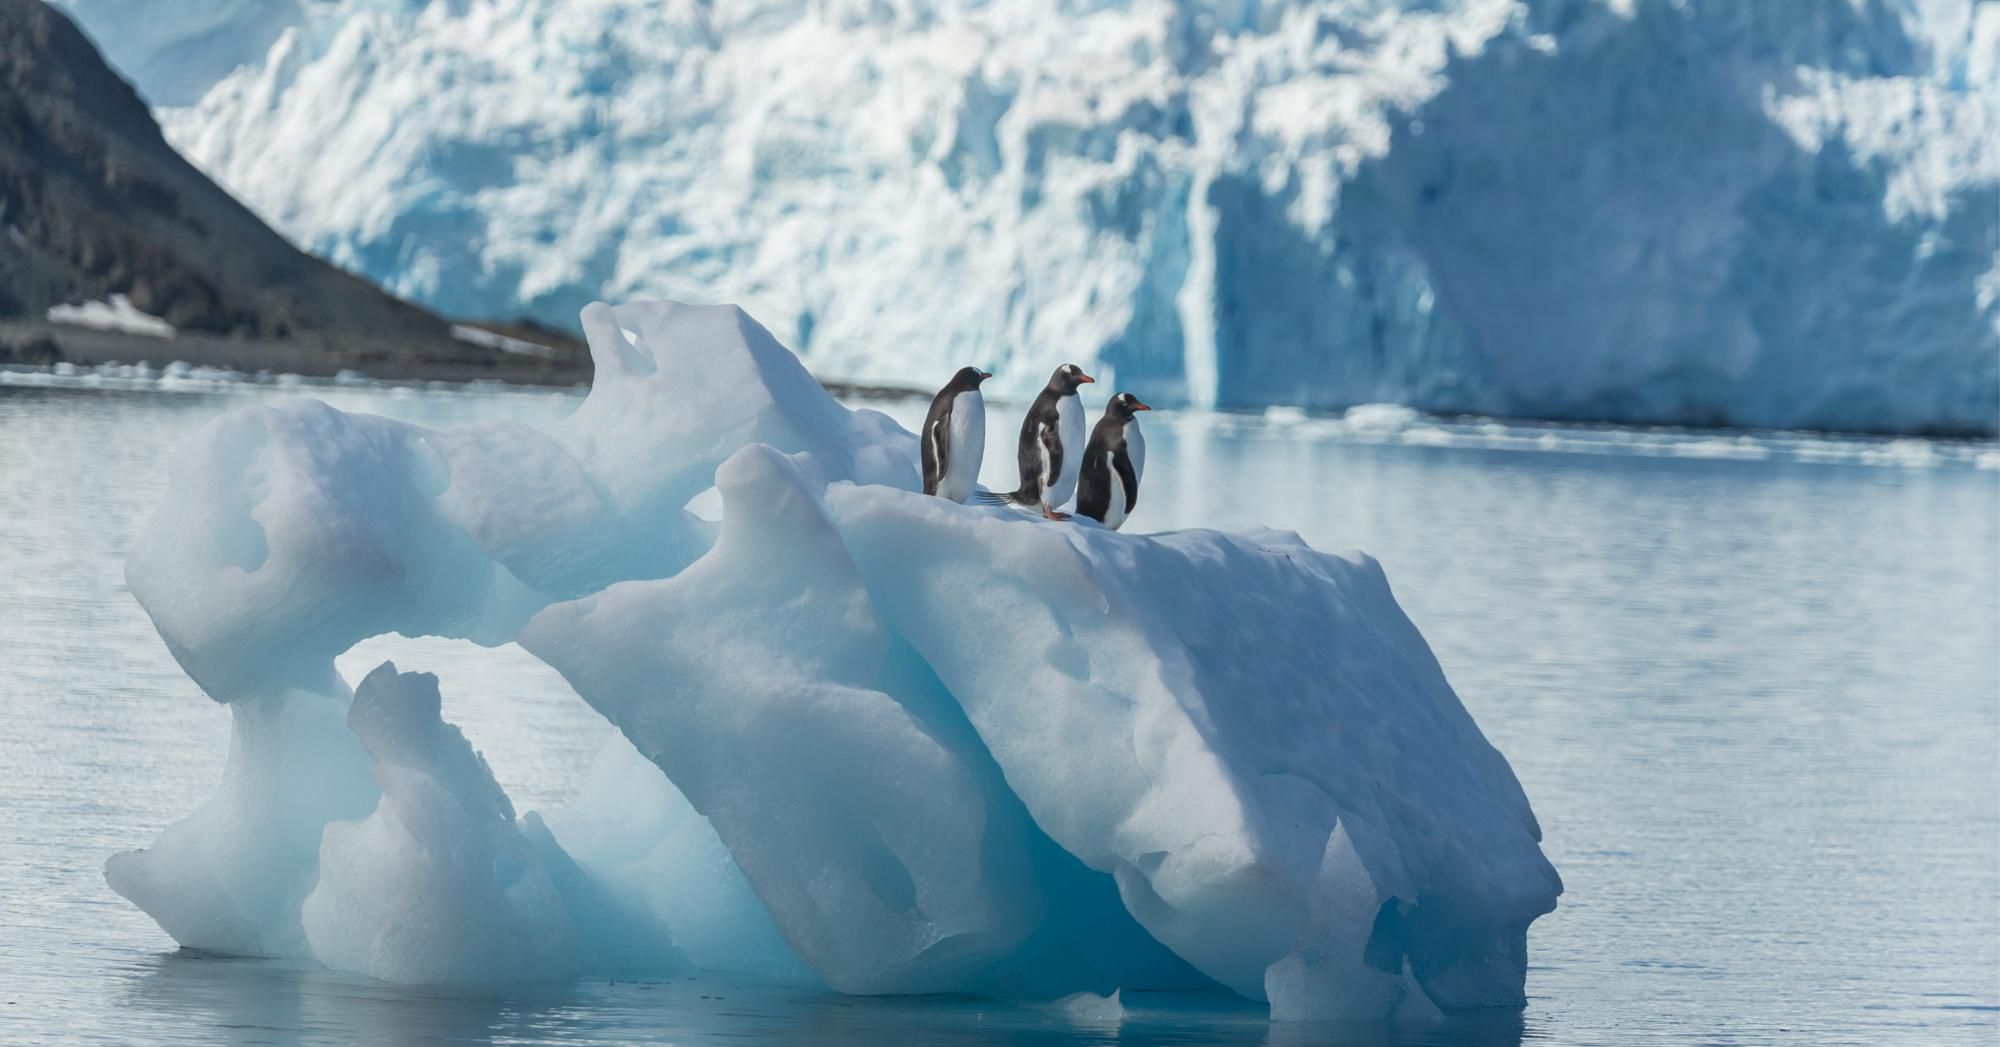 Three Gentoo penguins on top of an iceberg at Yellow Point Beach on January 1, 2020 in King George Island, Antarctica.